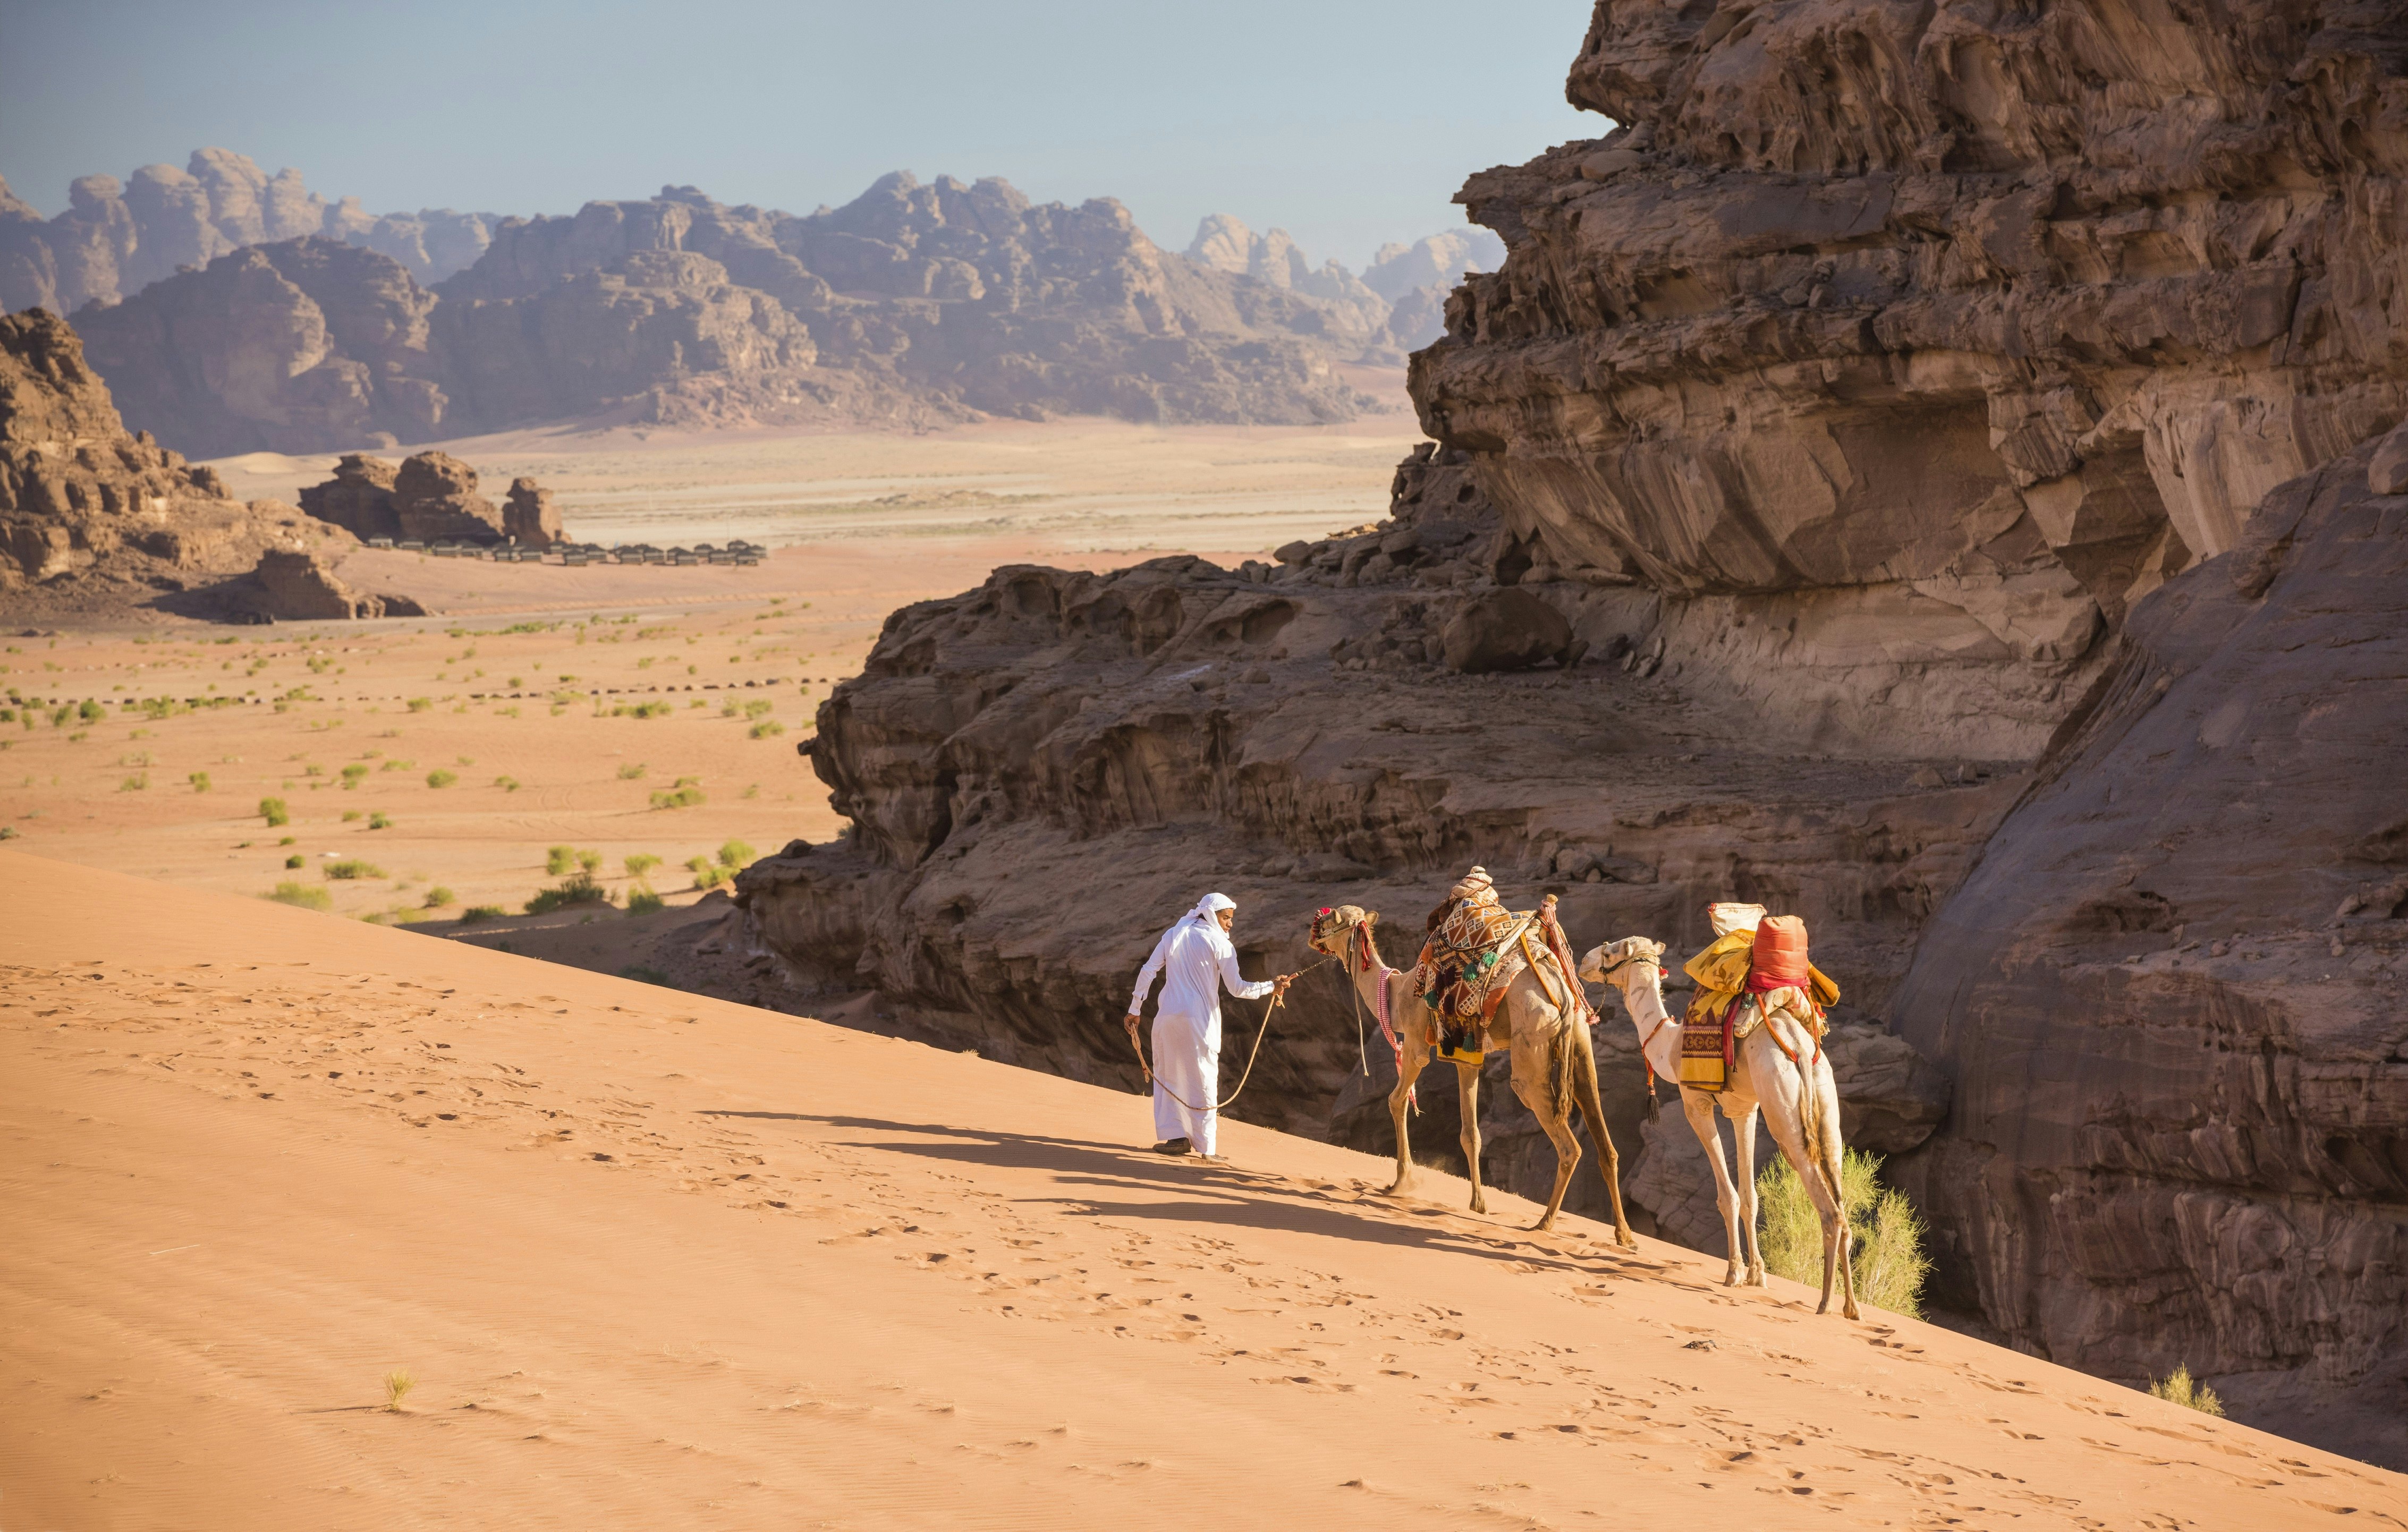 A Bedouin guide leads his two dromedary camels over the tall dunes of Wadi Rum; in the background large rocky mountains rise out of the sandy desert floor.